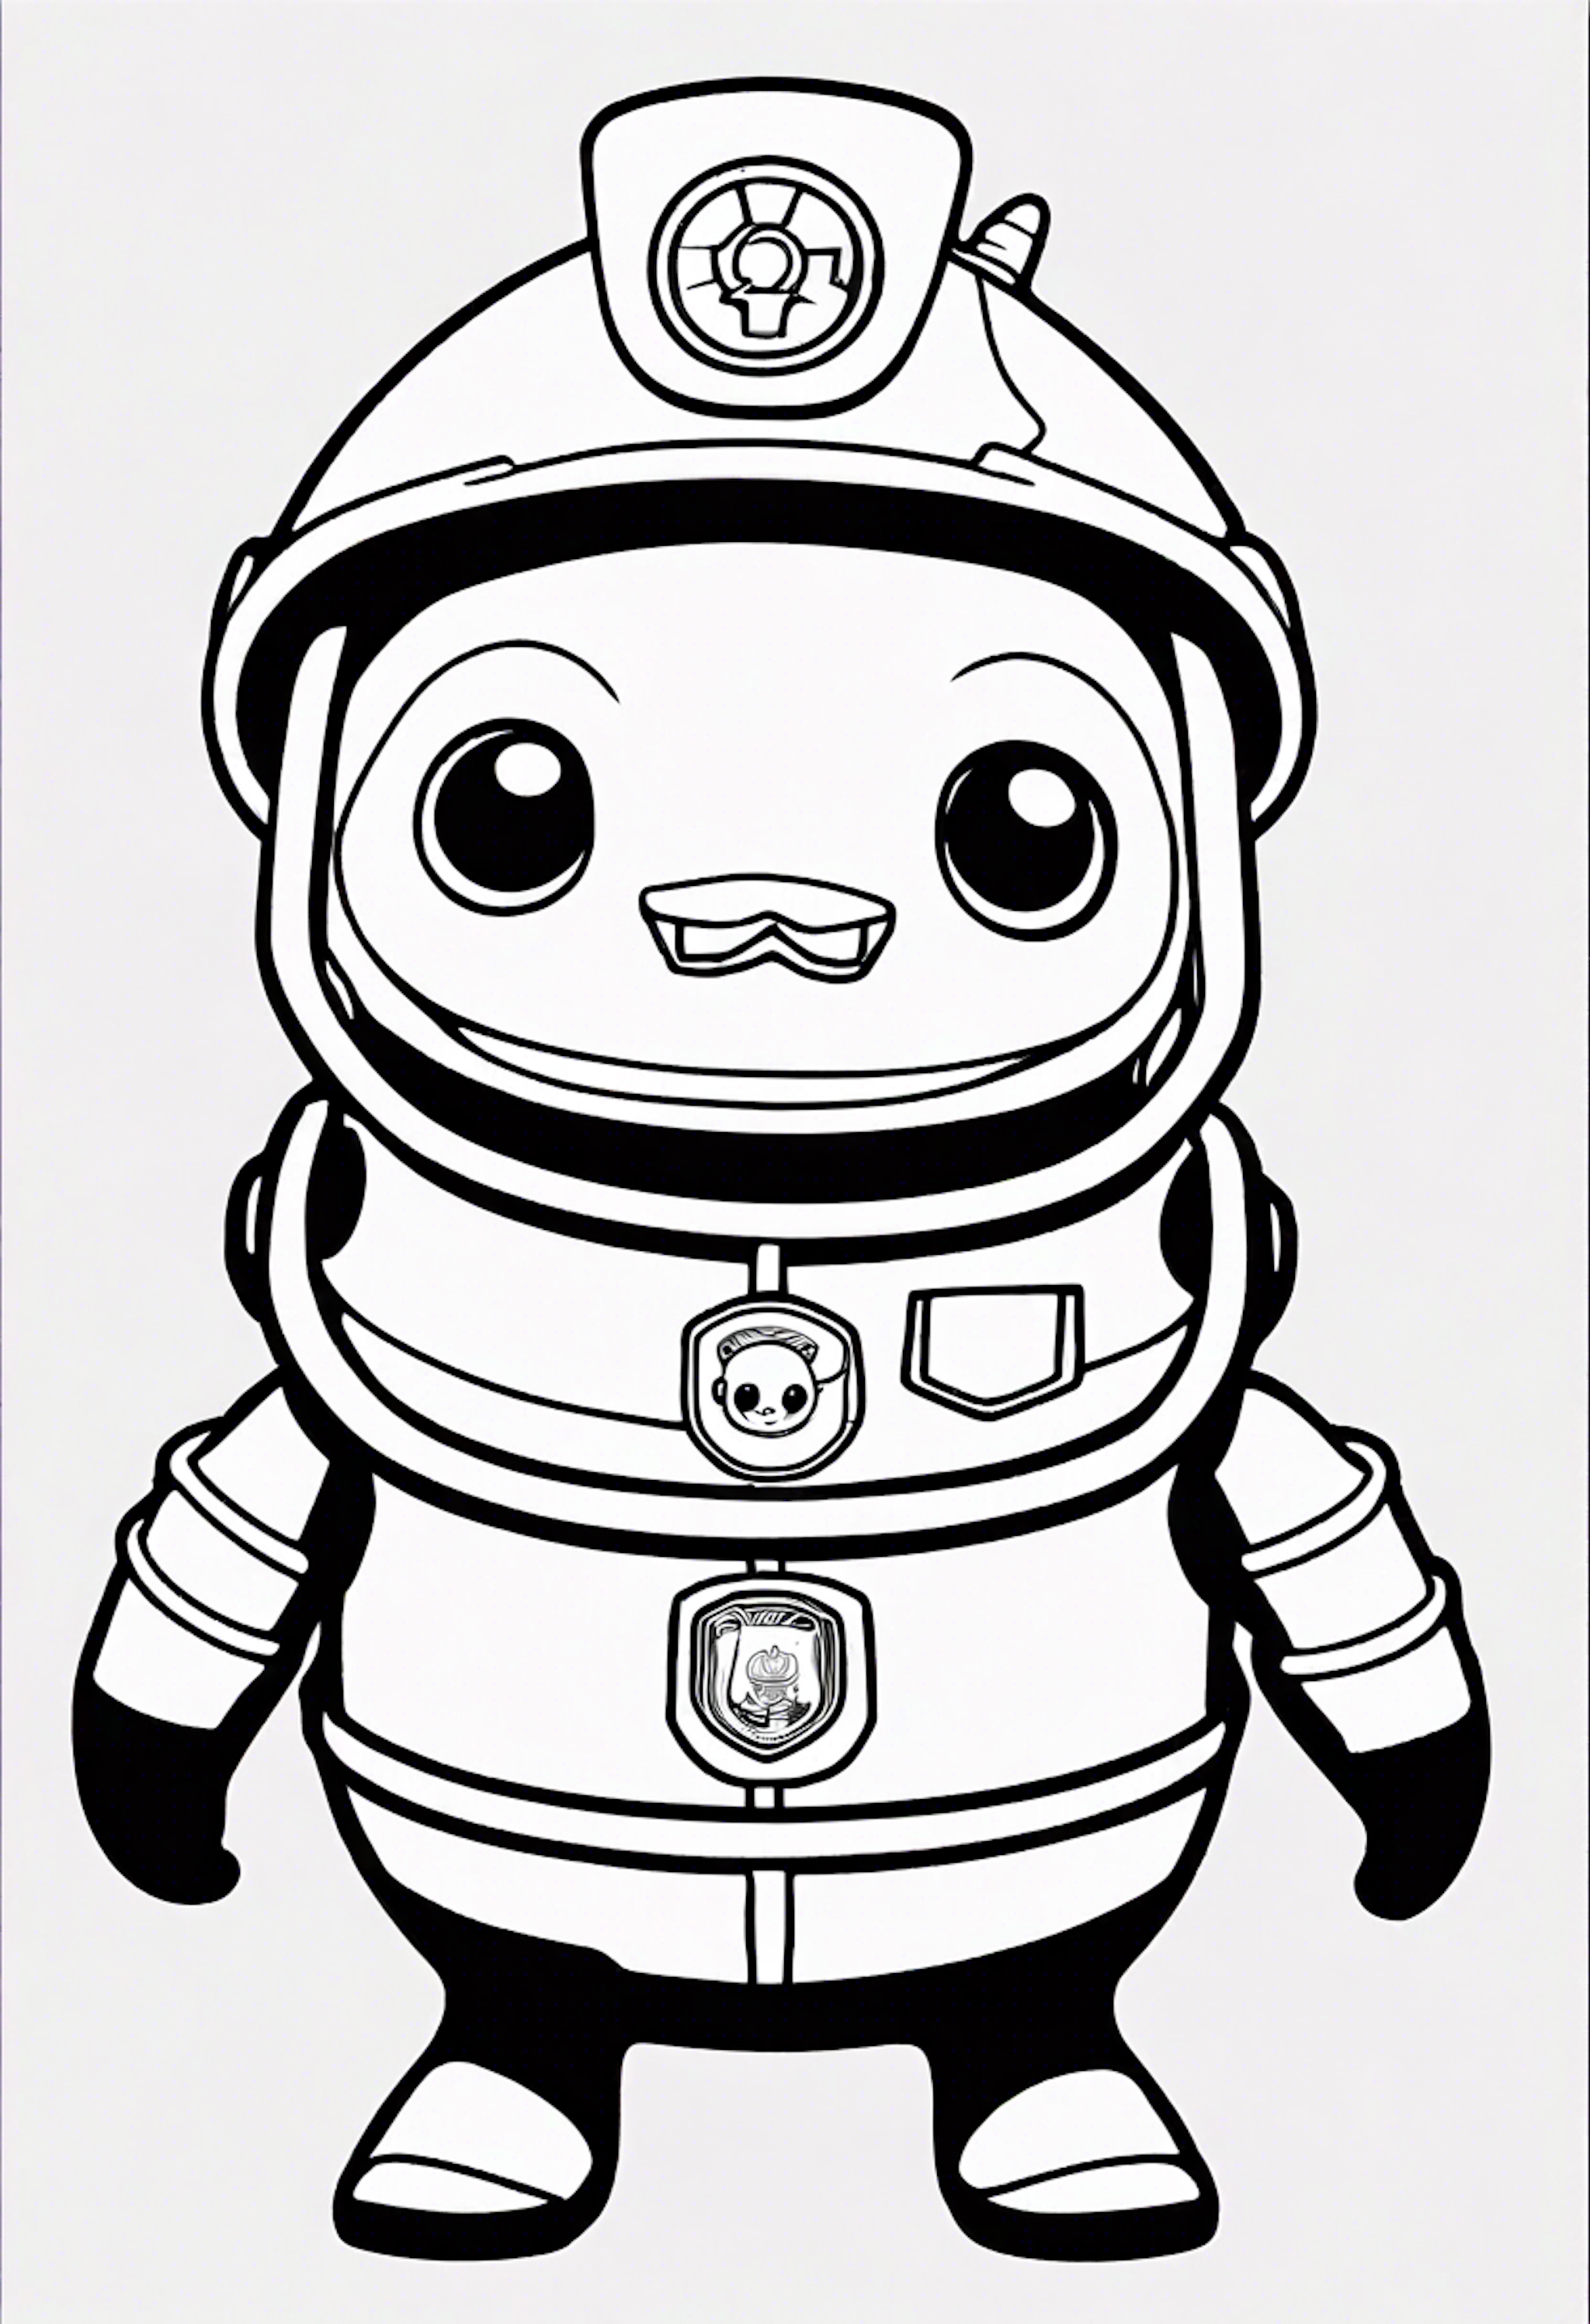 A coloring page for 1 Octonauts coloring pages